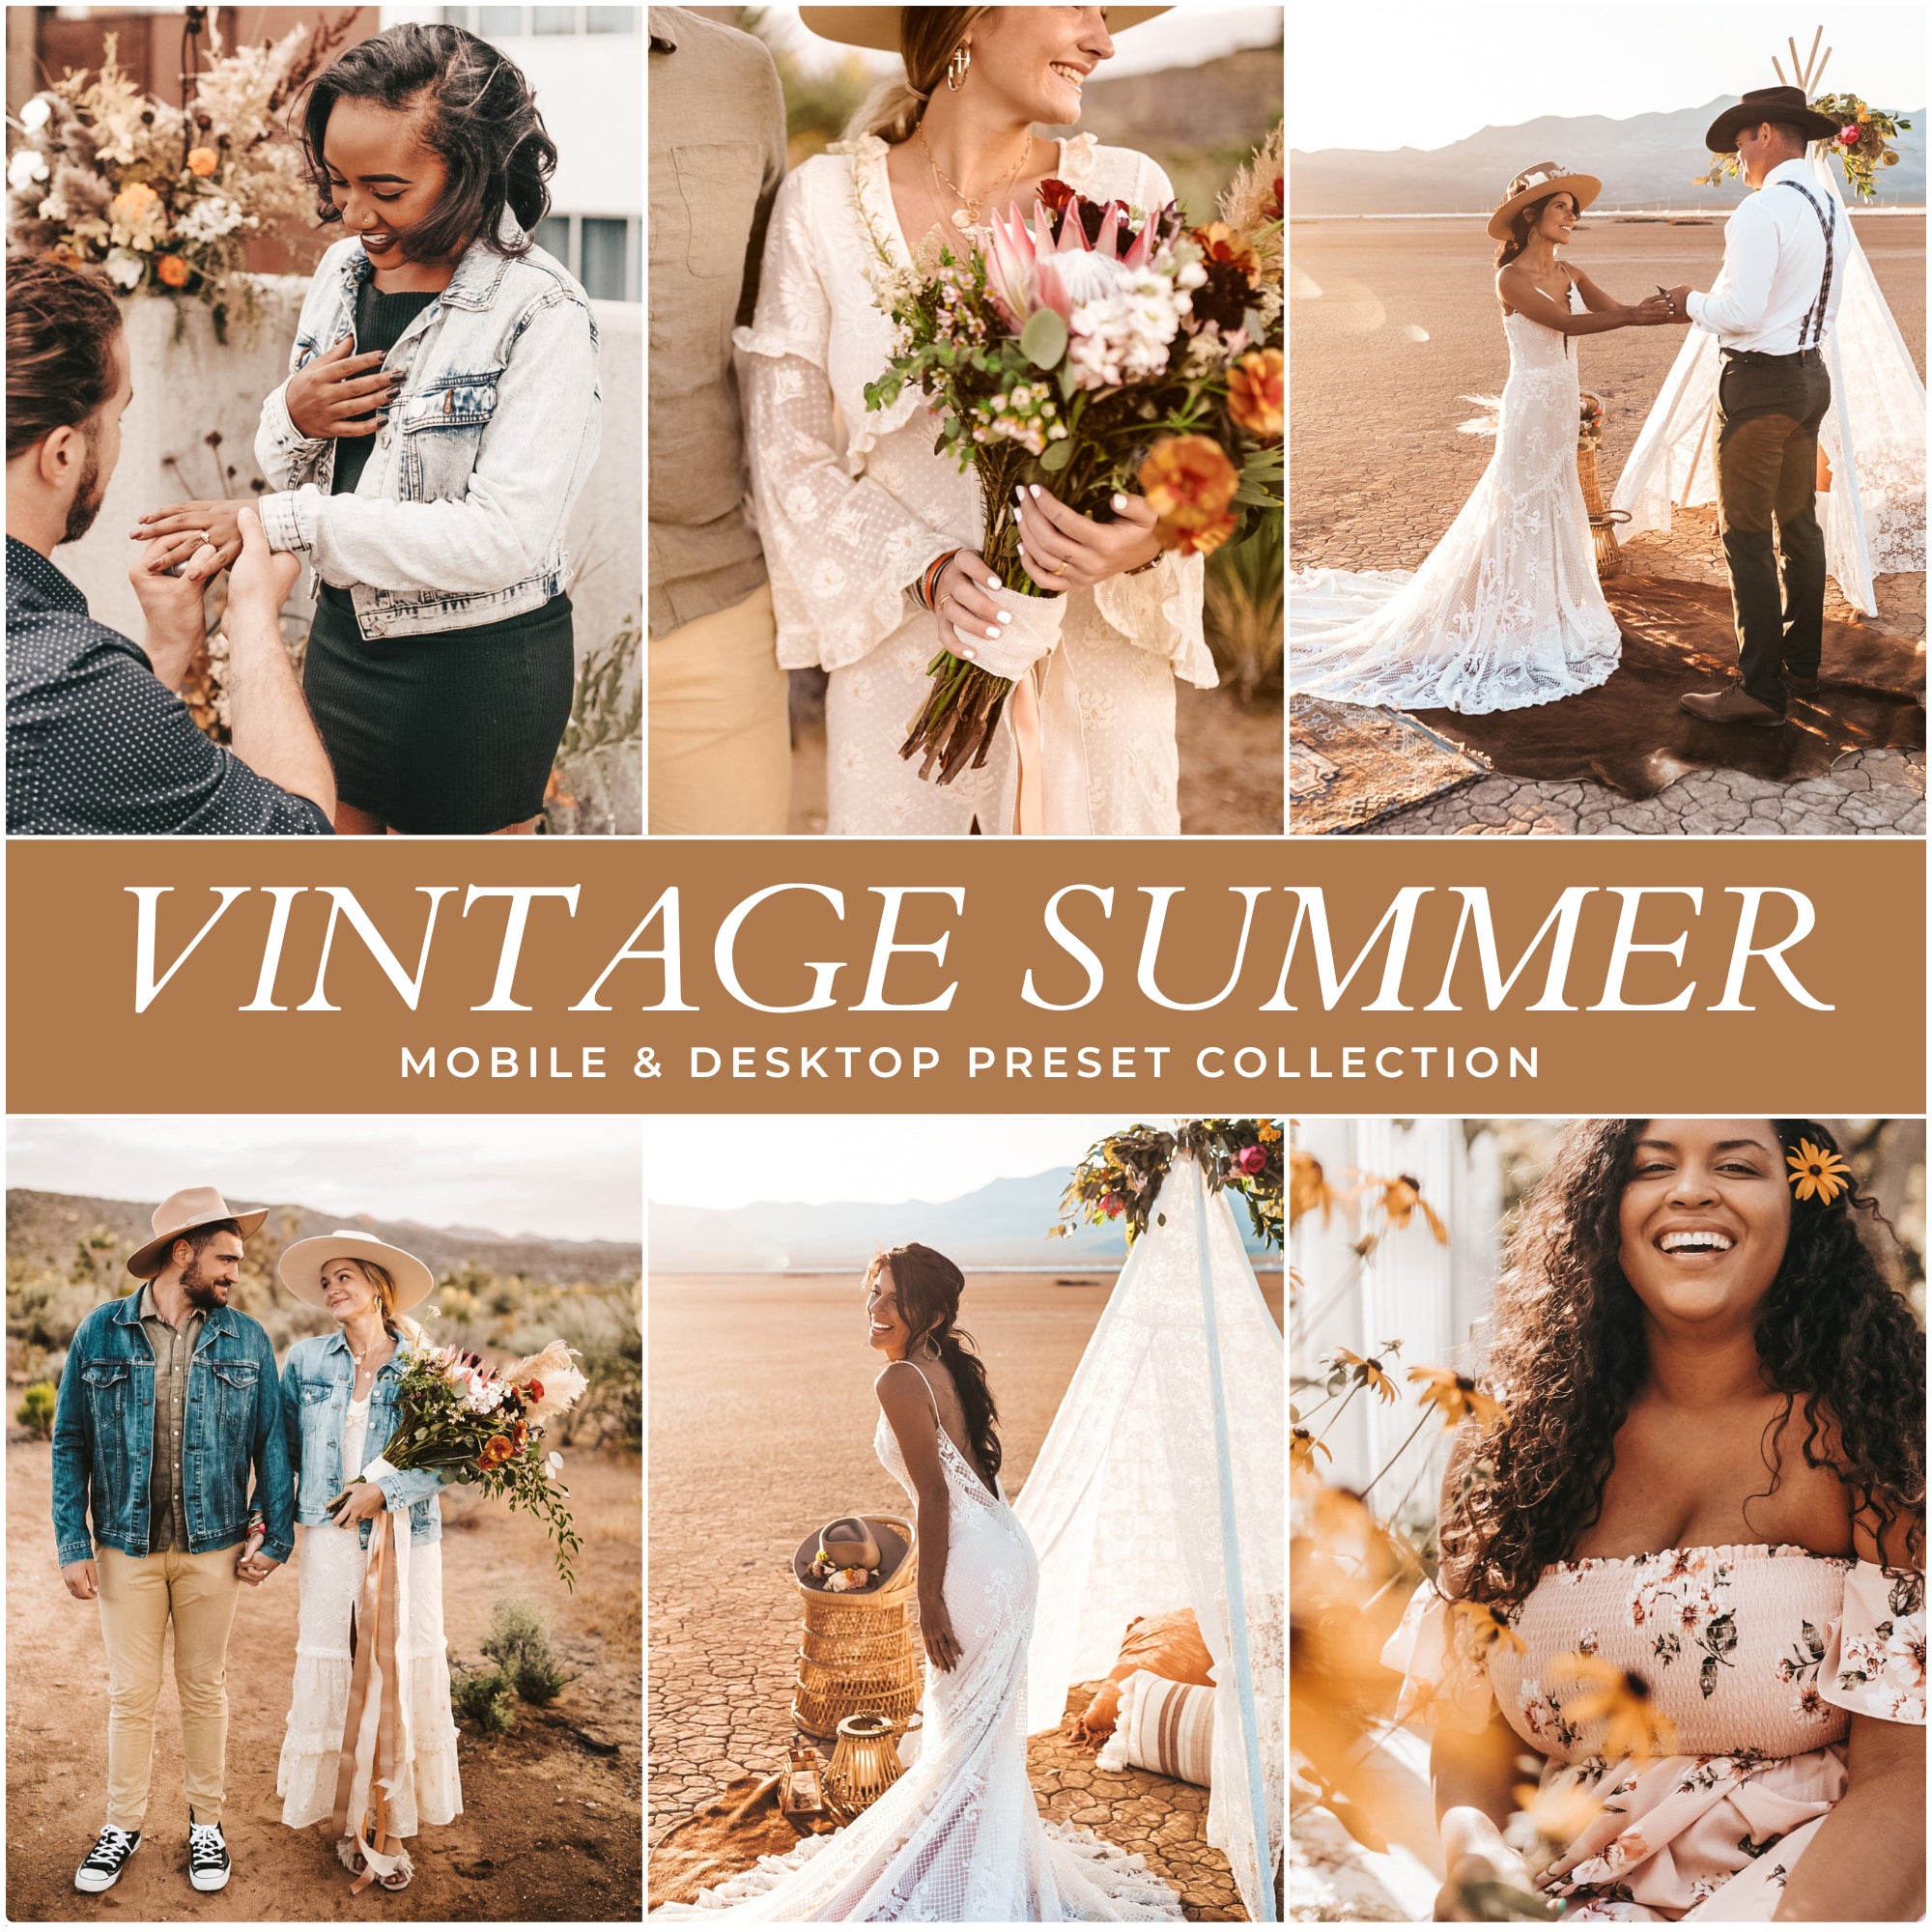 Vintage Summer Lightroom Presets For Photographers and Instagram Influencers Photo Editing In Adobe Lightroom By Lou And Marks Presets